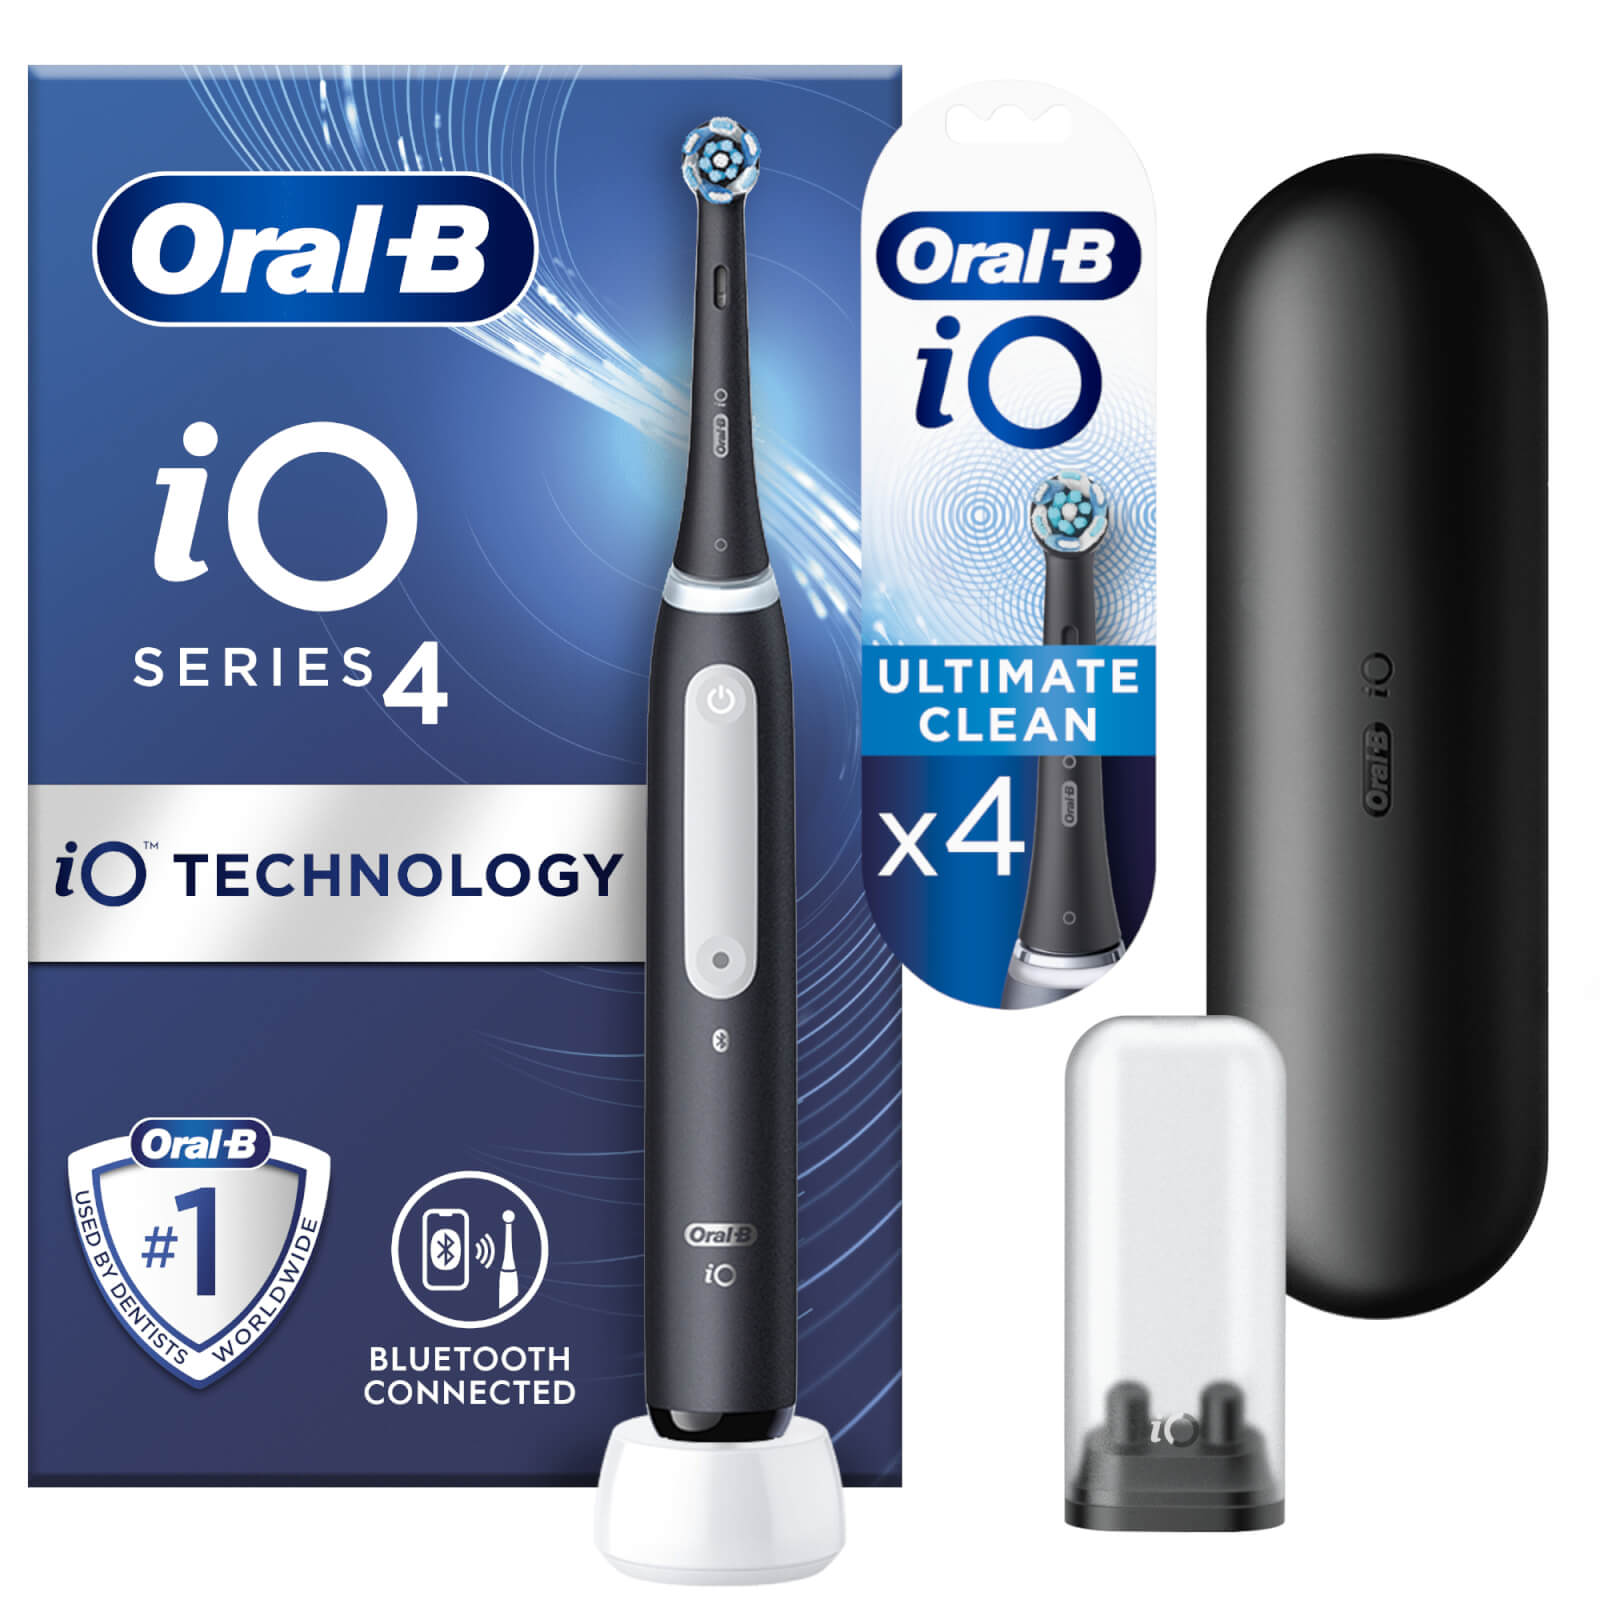 Oral-B iO4 Matte Black Electric Toothbrush with Travel Case - Toothbrush + 4 Refills